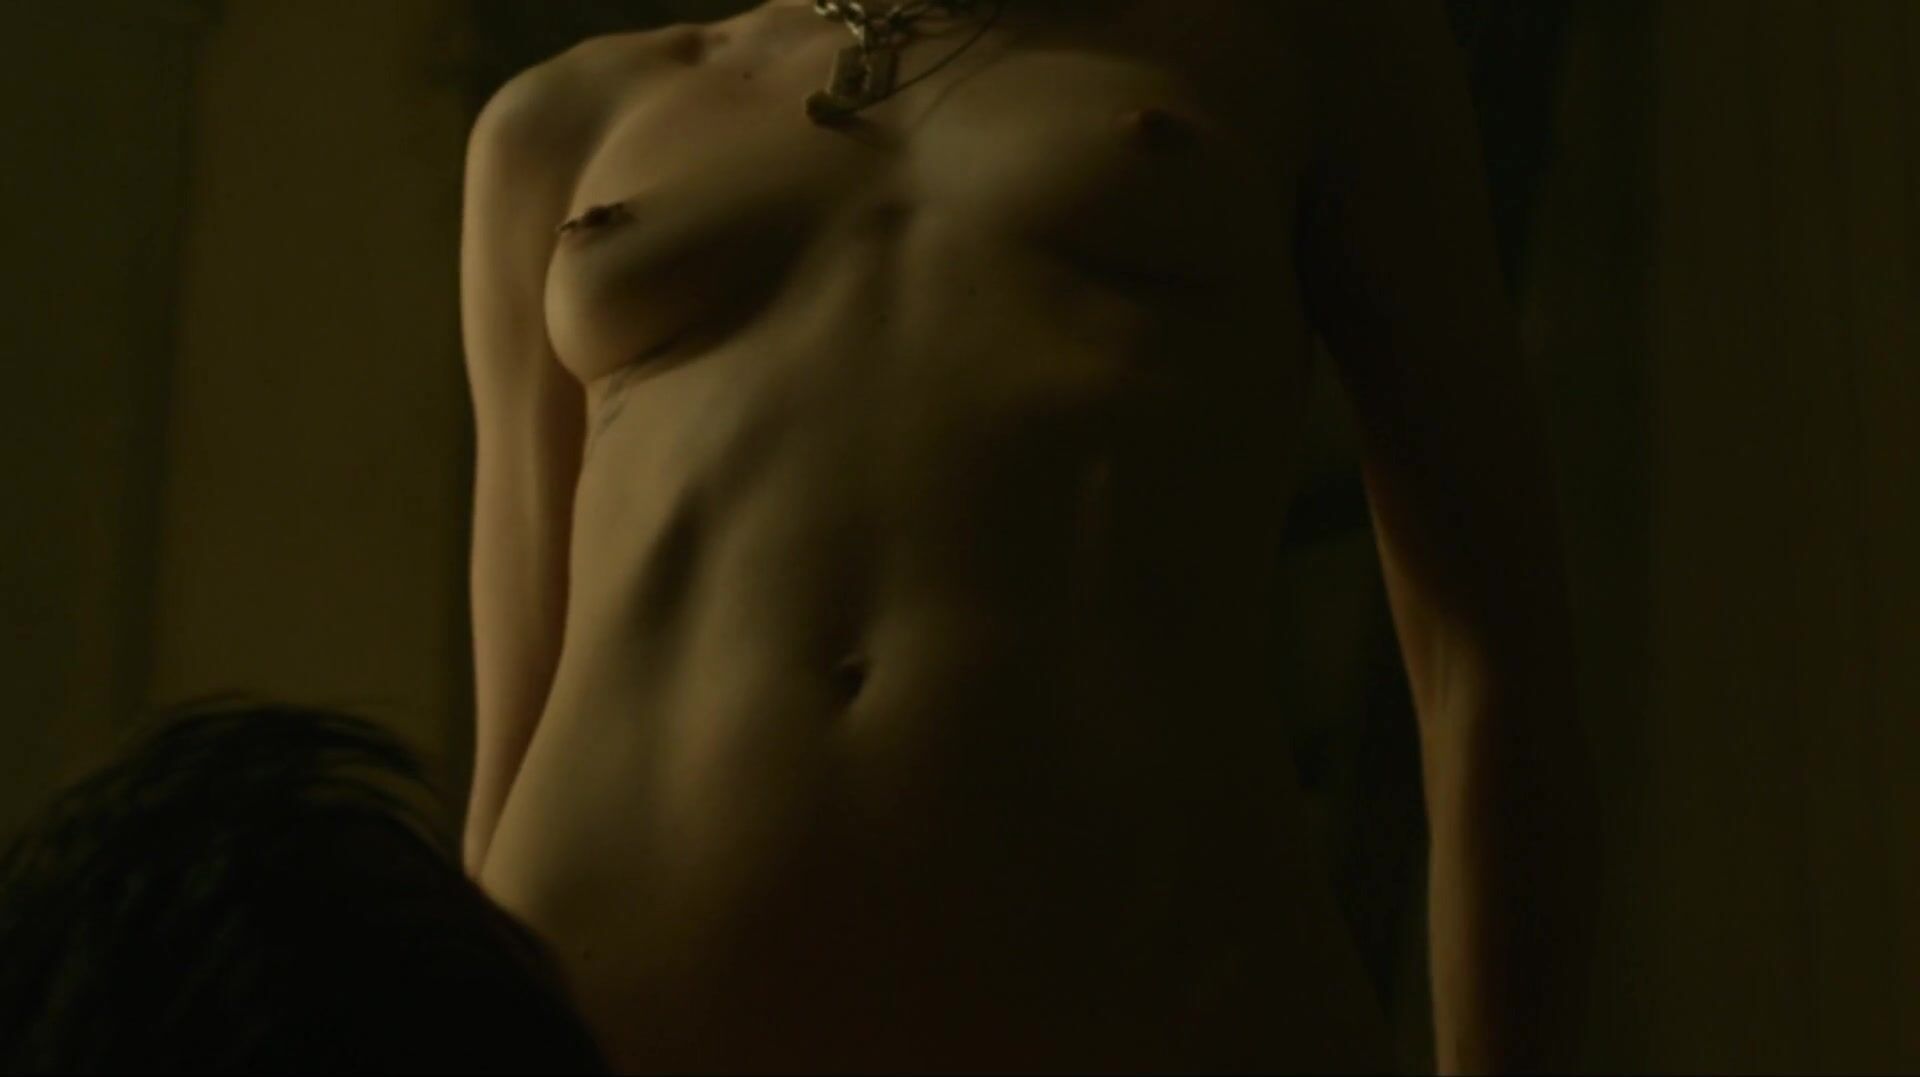 Amateurs Gone Wild Men hump Rooney Mara with her consent or without it in Girl With The Dragon Tattoo Femdom Porn